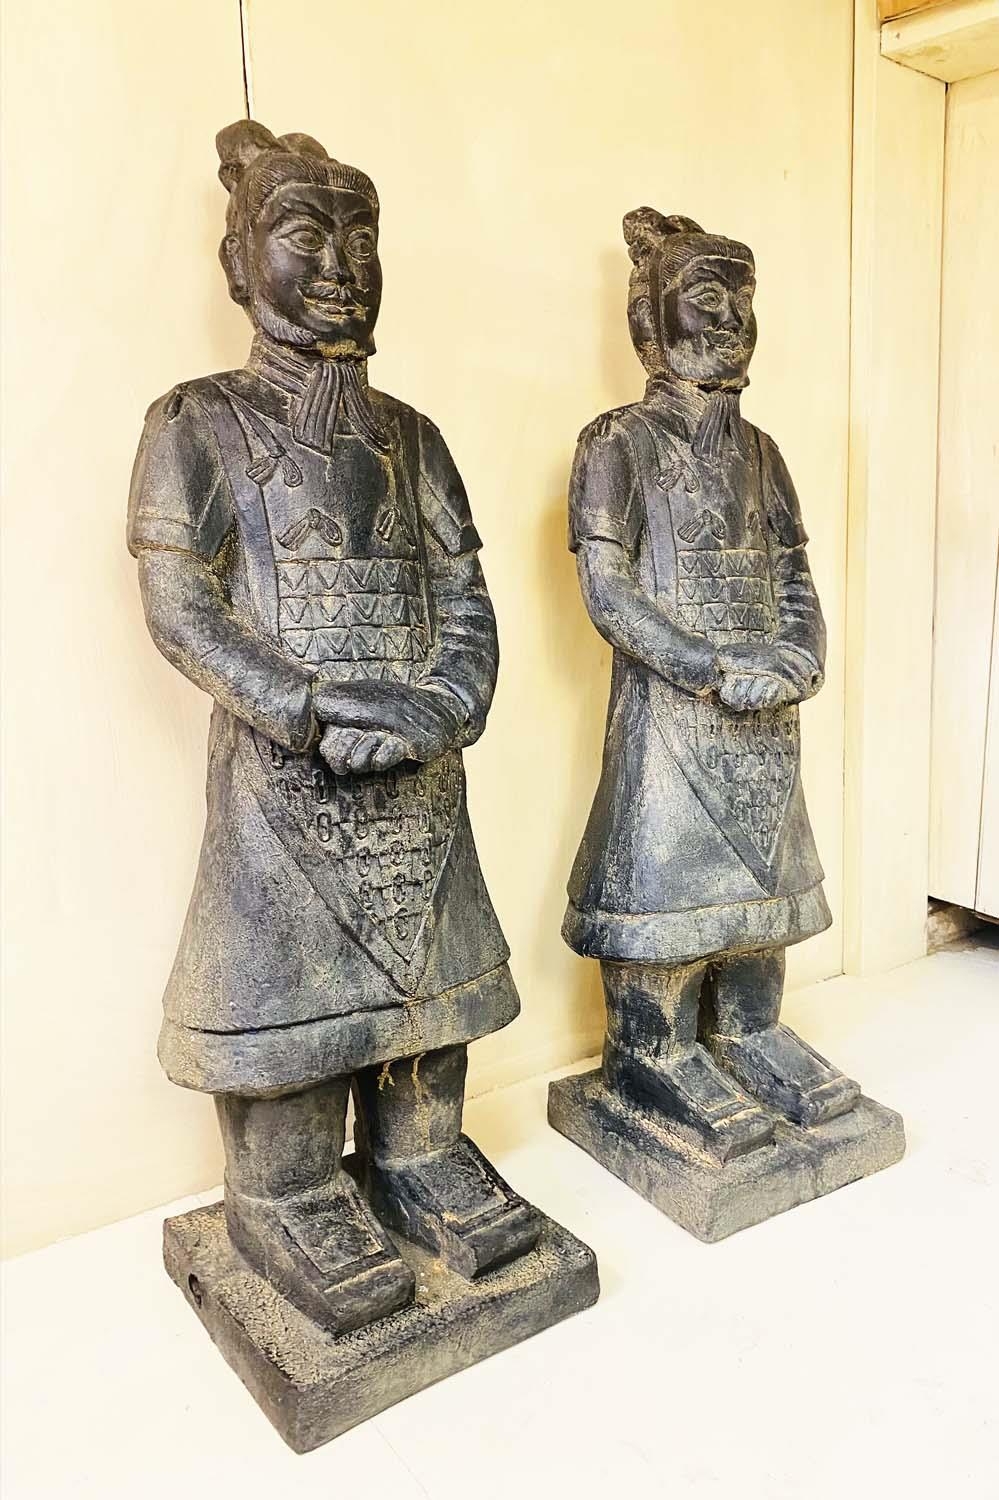 TERRACOTTA WARRIOR STYLE FIGURES, a pair, resin, 120cm x 34cm x 34cm. (2) - Image 2 of 4